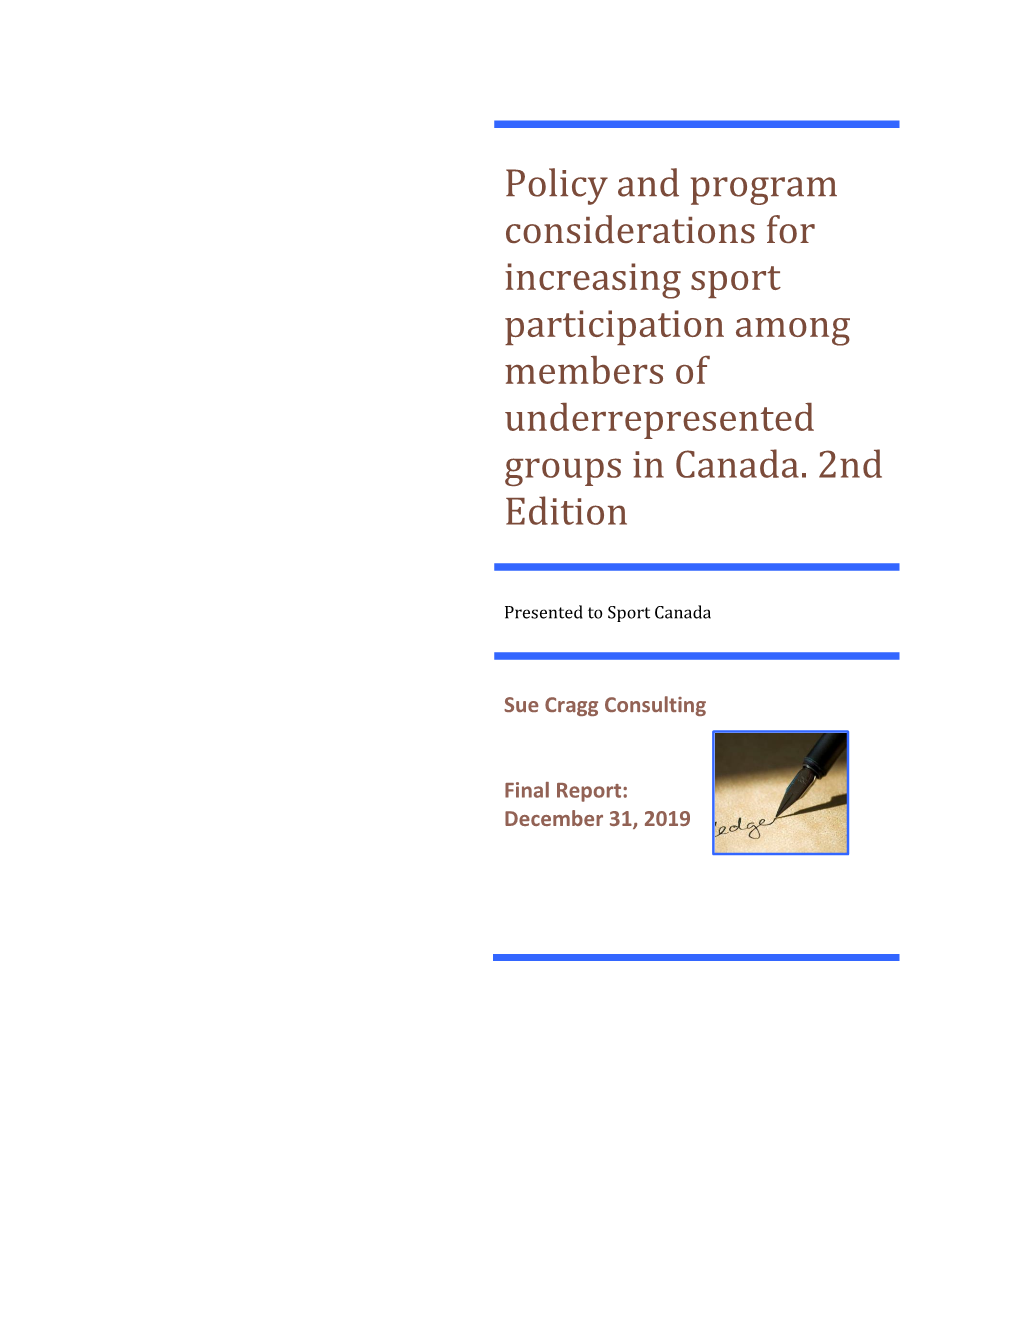 Policy and Program Considerations for Increasing Sport Participation Among Members of Underrepresented Groups in Canada